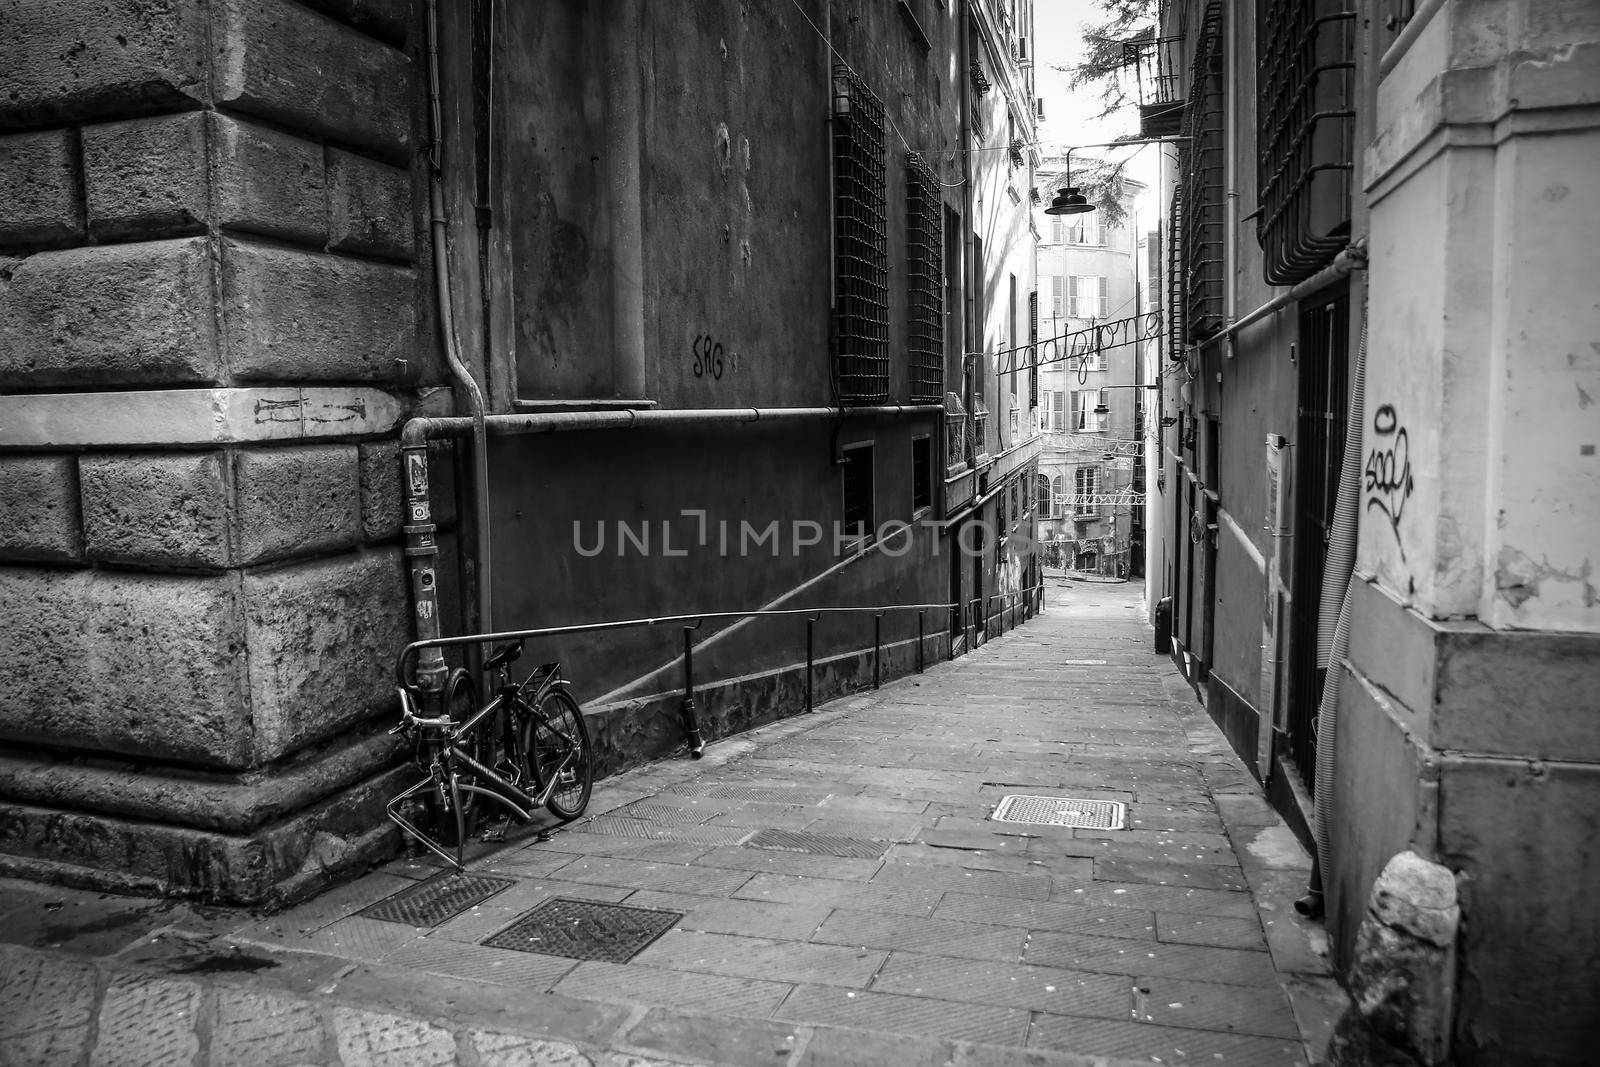 photograph taken walking through the typical alleys of the city of Genoa, Sunday 11 February 2018